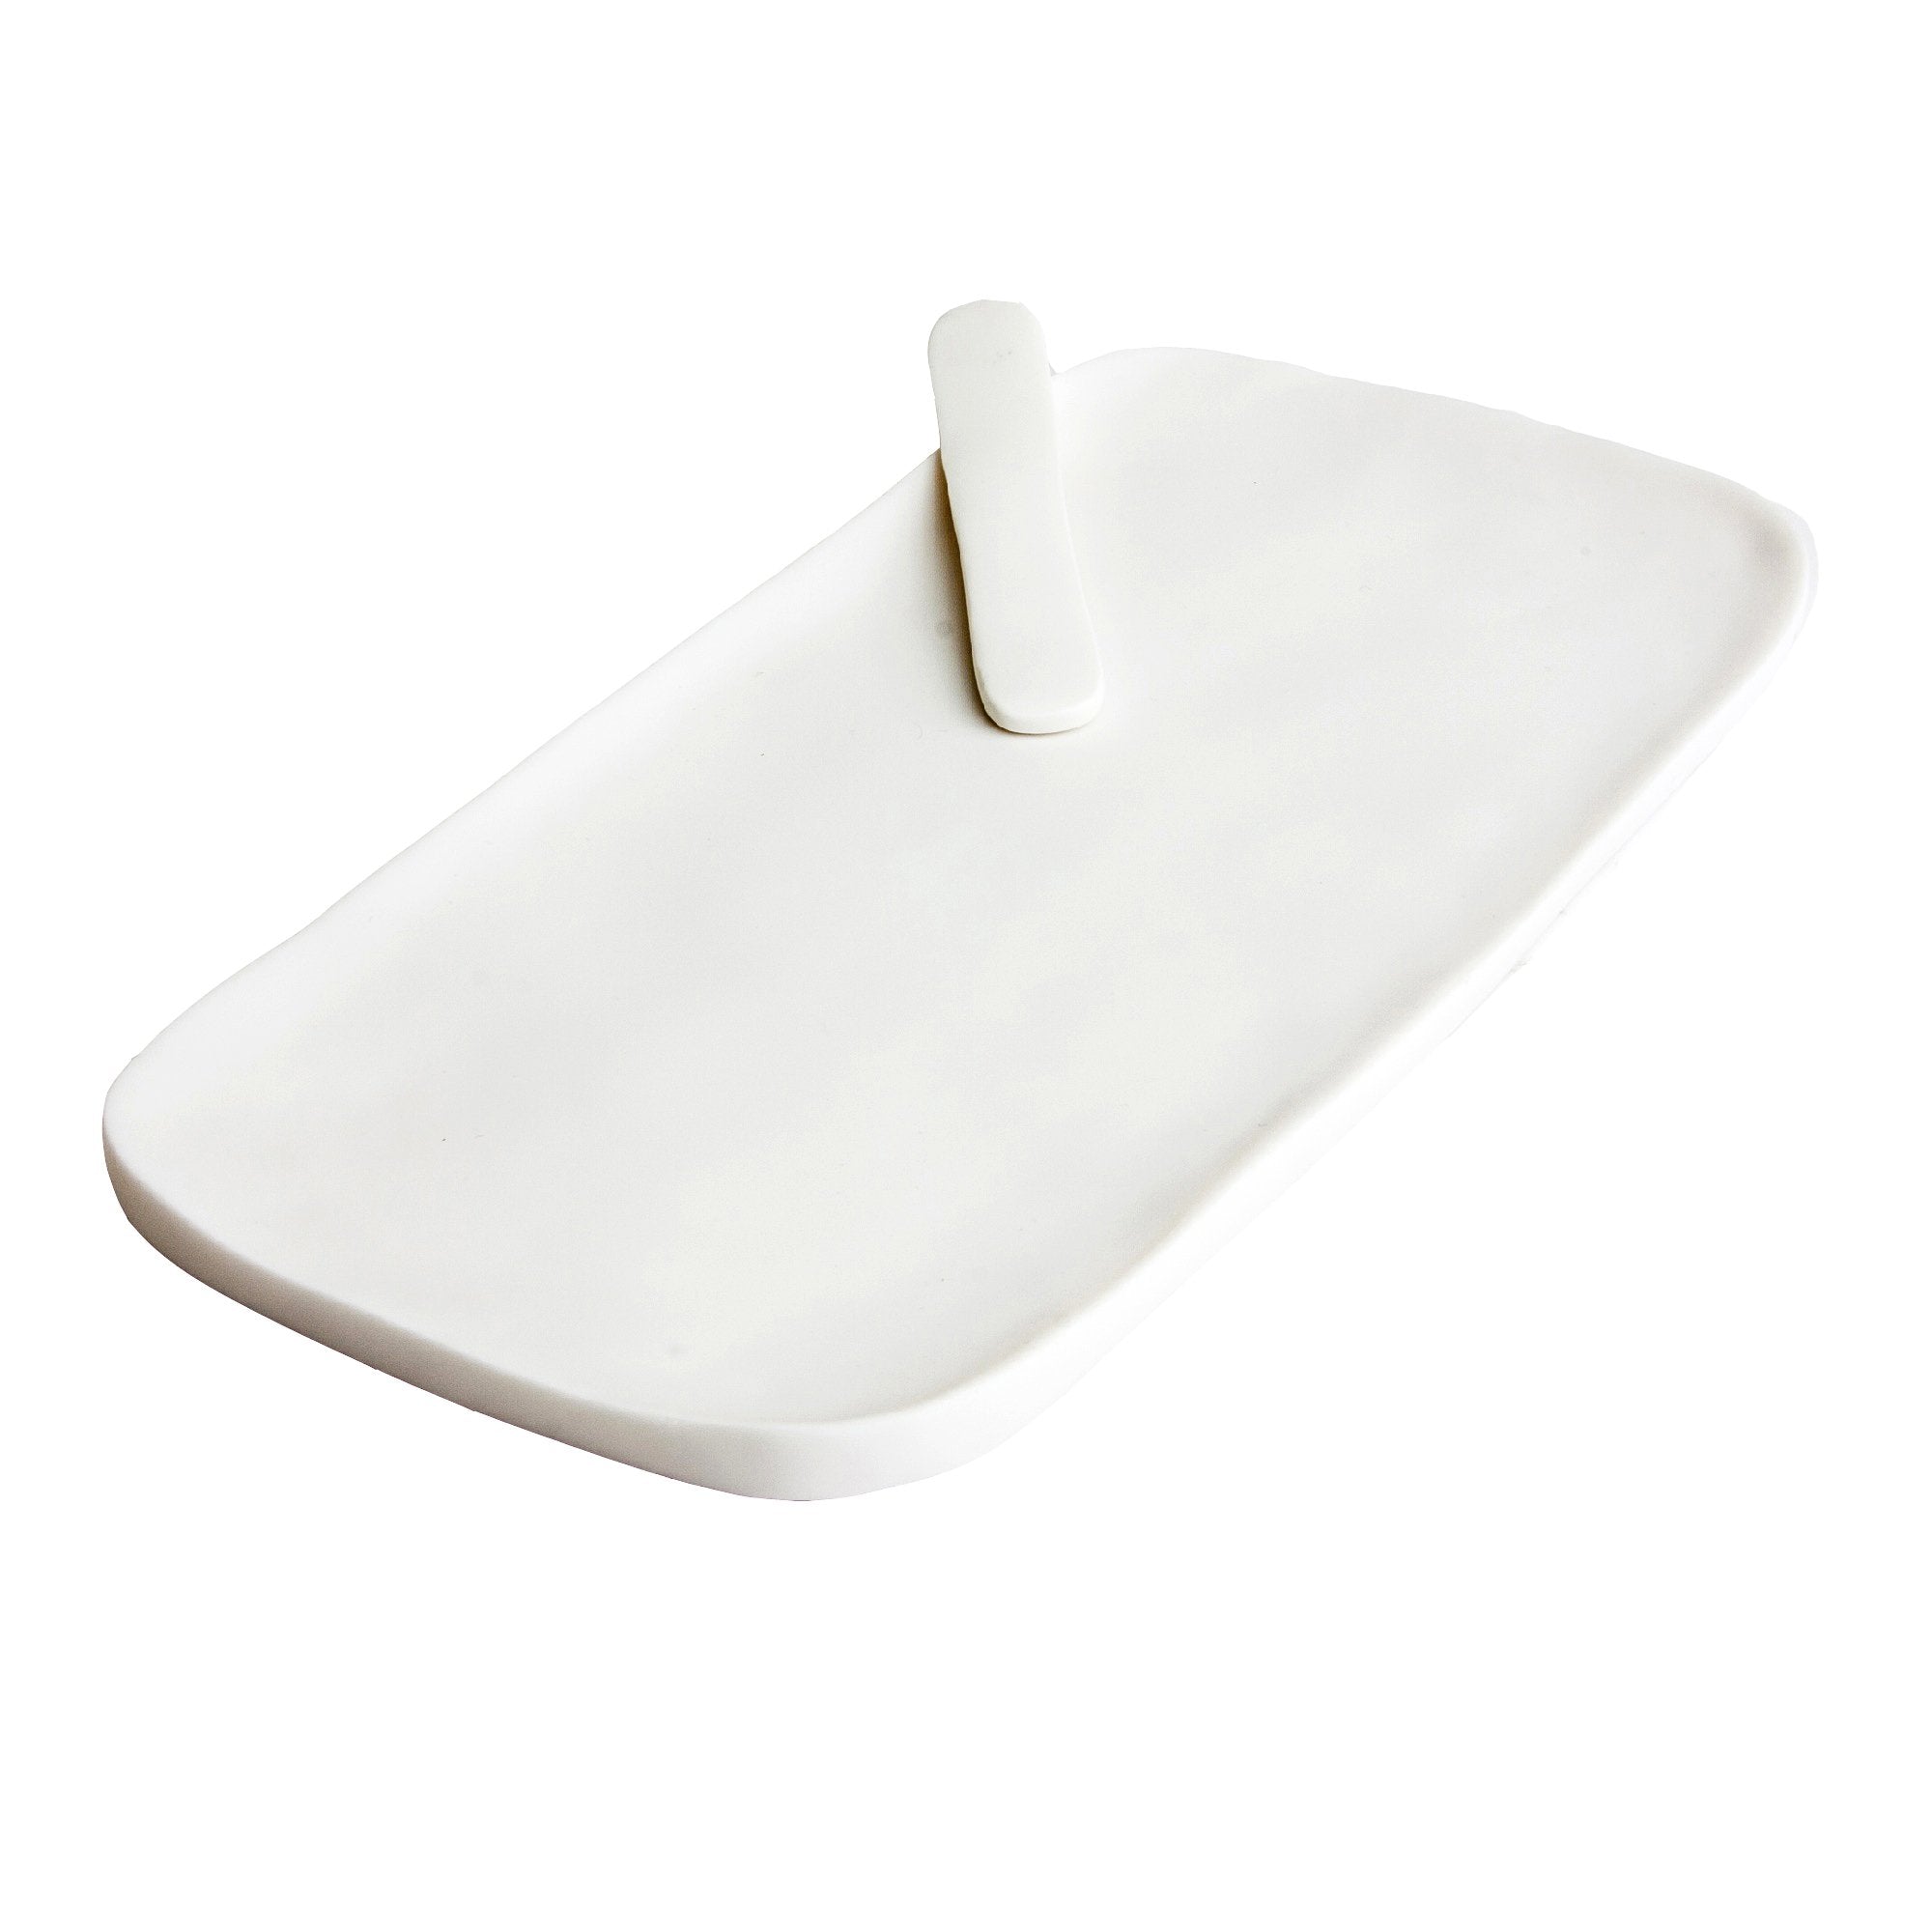 Tina Frey Serving Bowl with Cheese Spreader - White